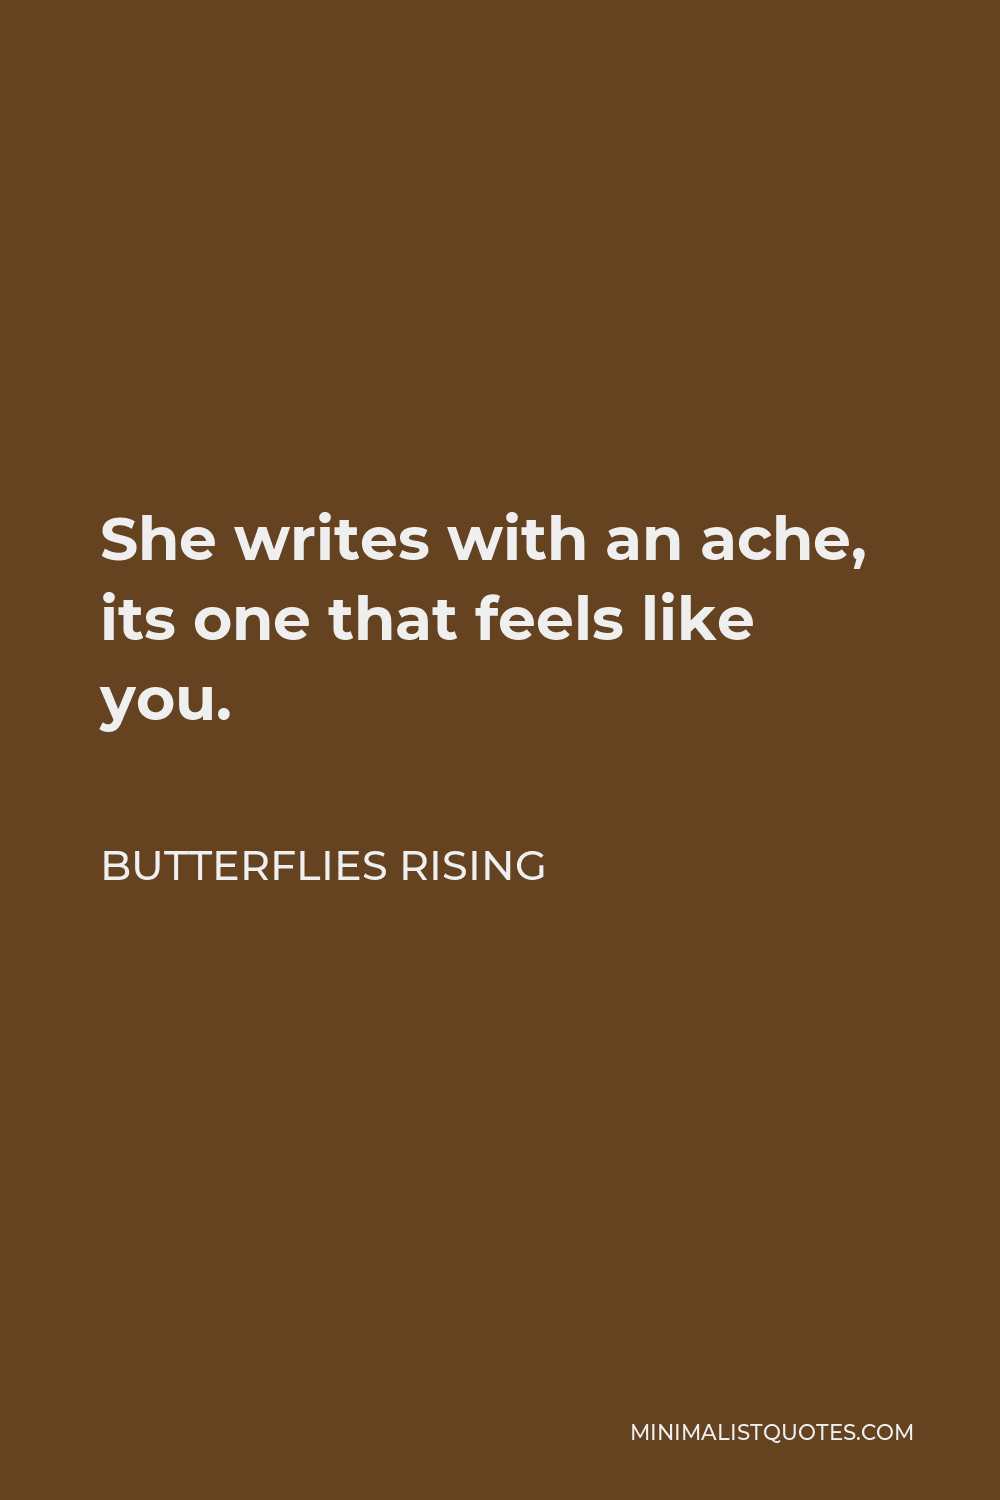 Butterflies Rising Quote - She writes with an ache, its one that feels like you.